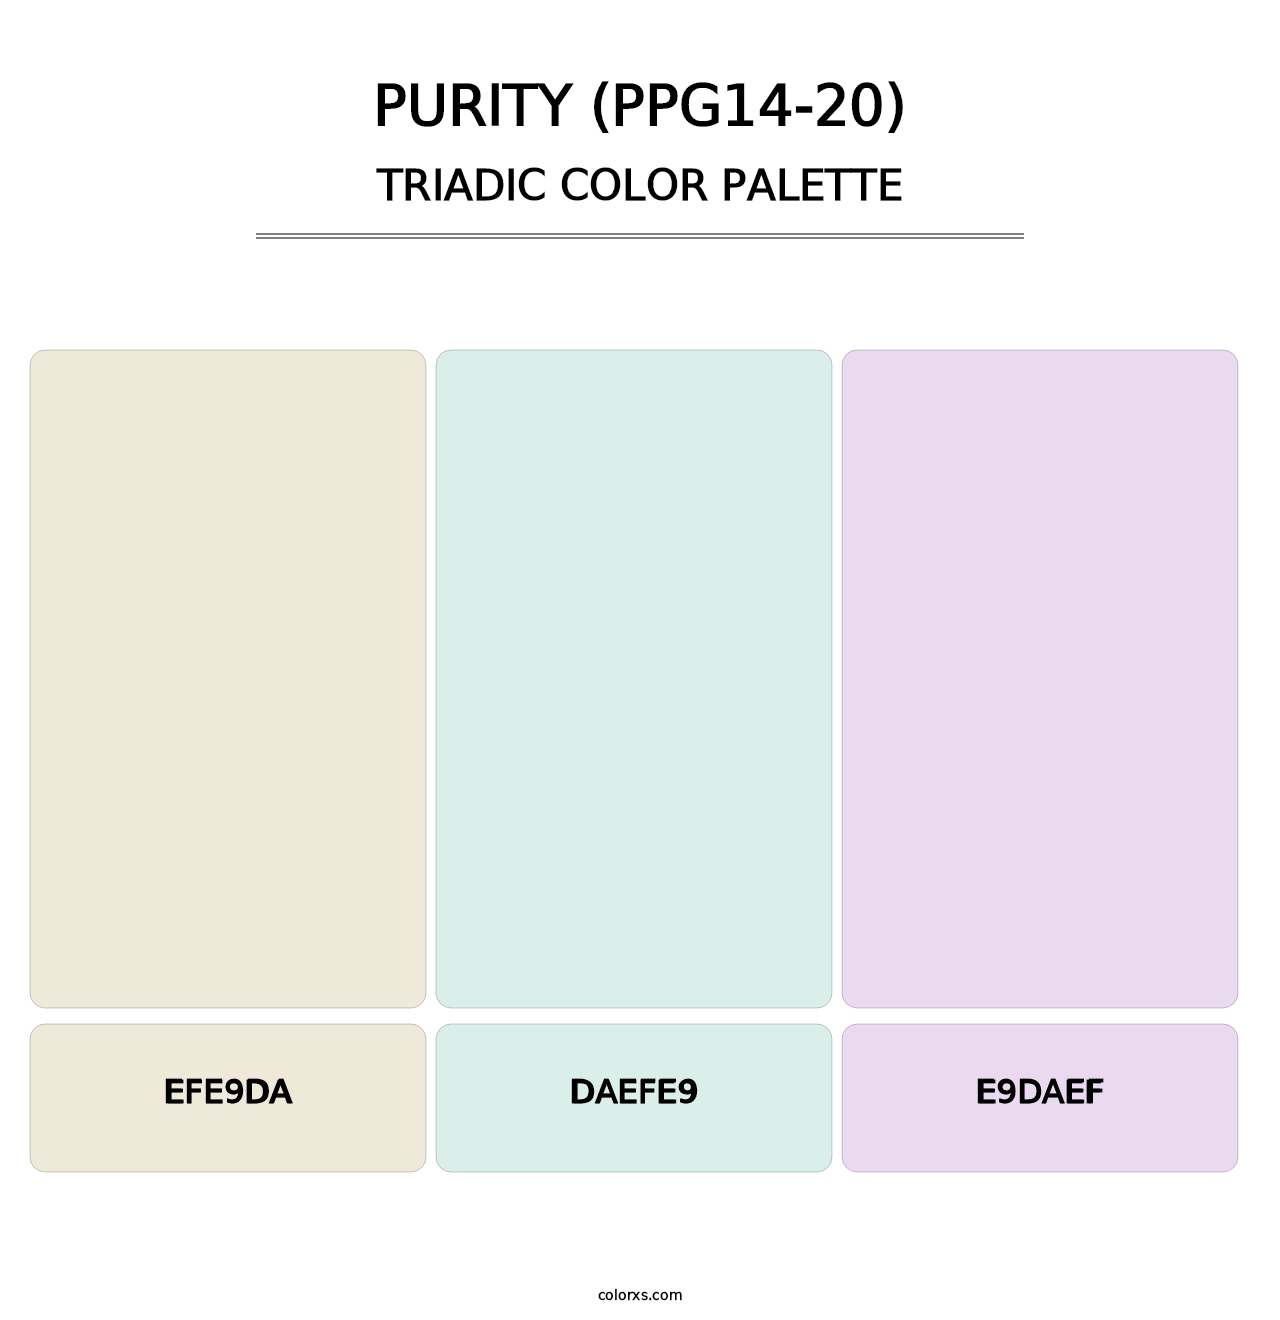 Purity (PPG14-20) - Triadic Color Palette